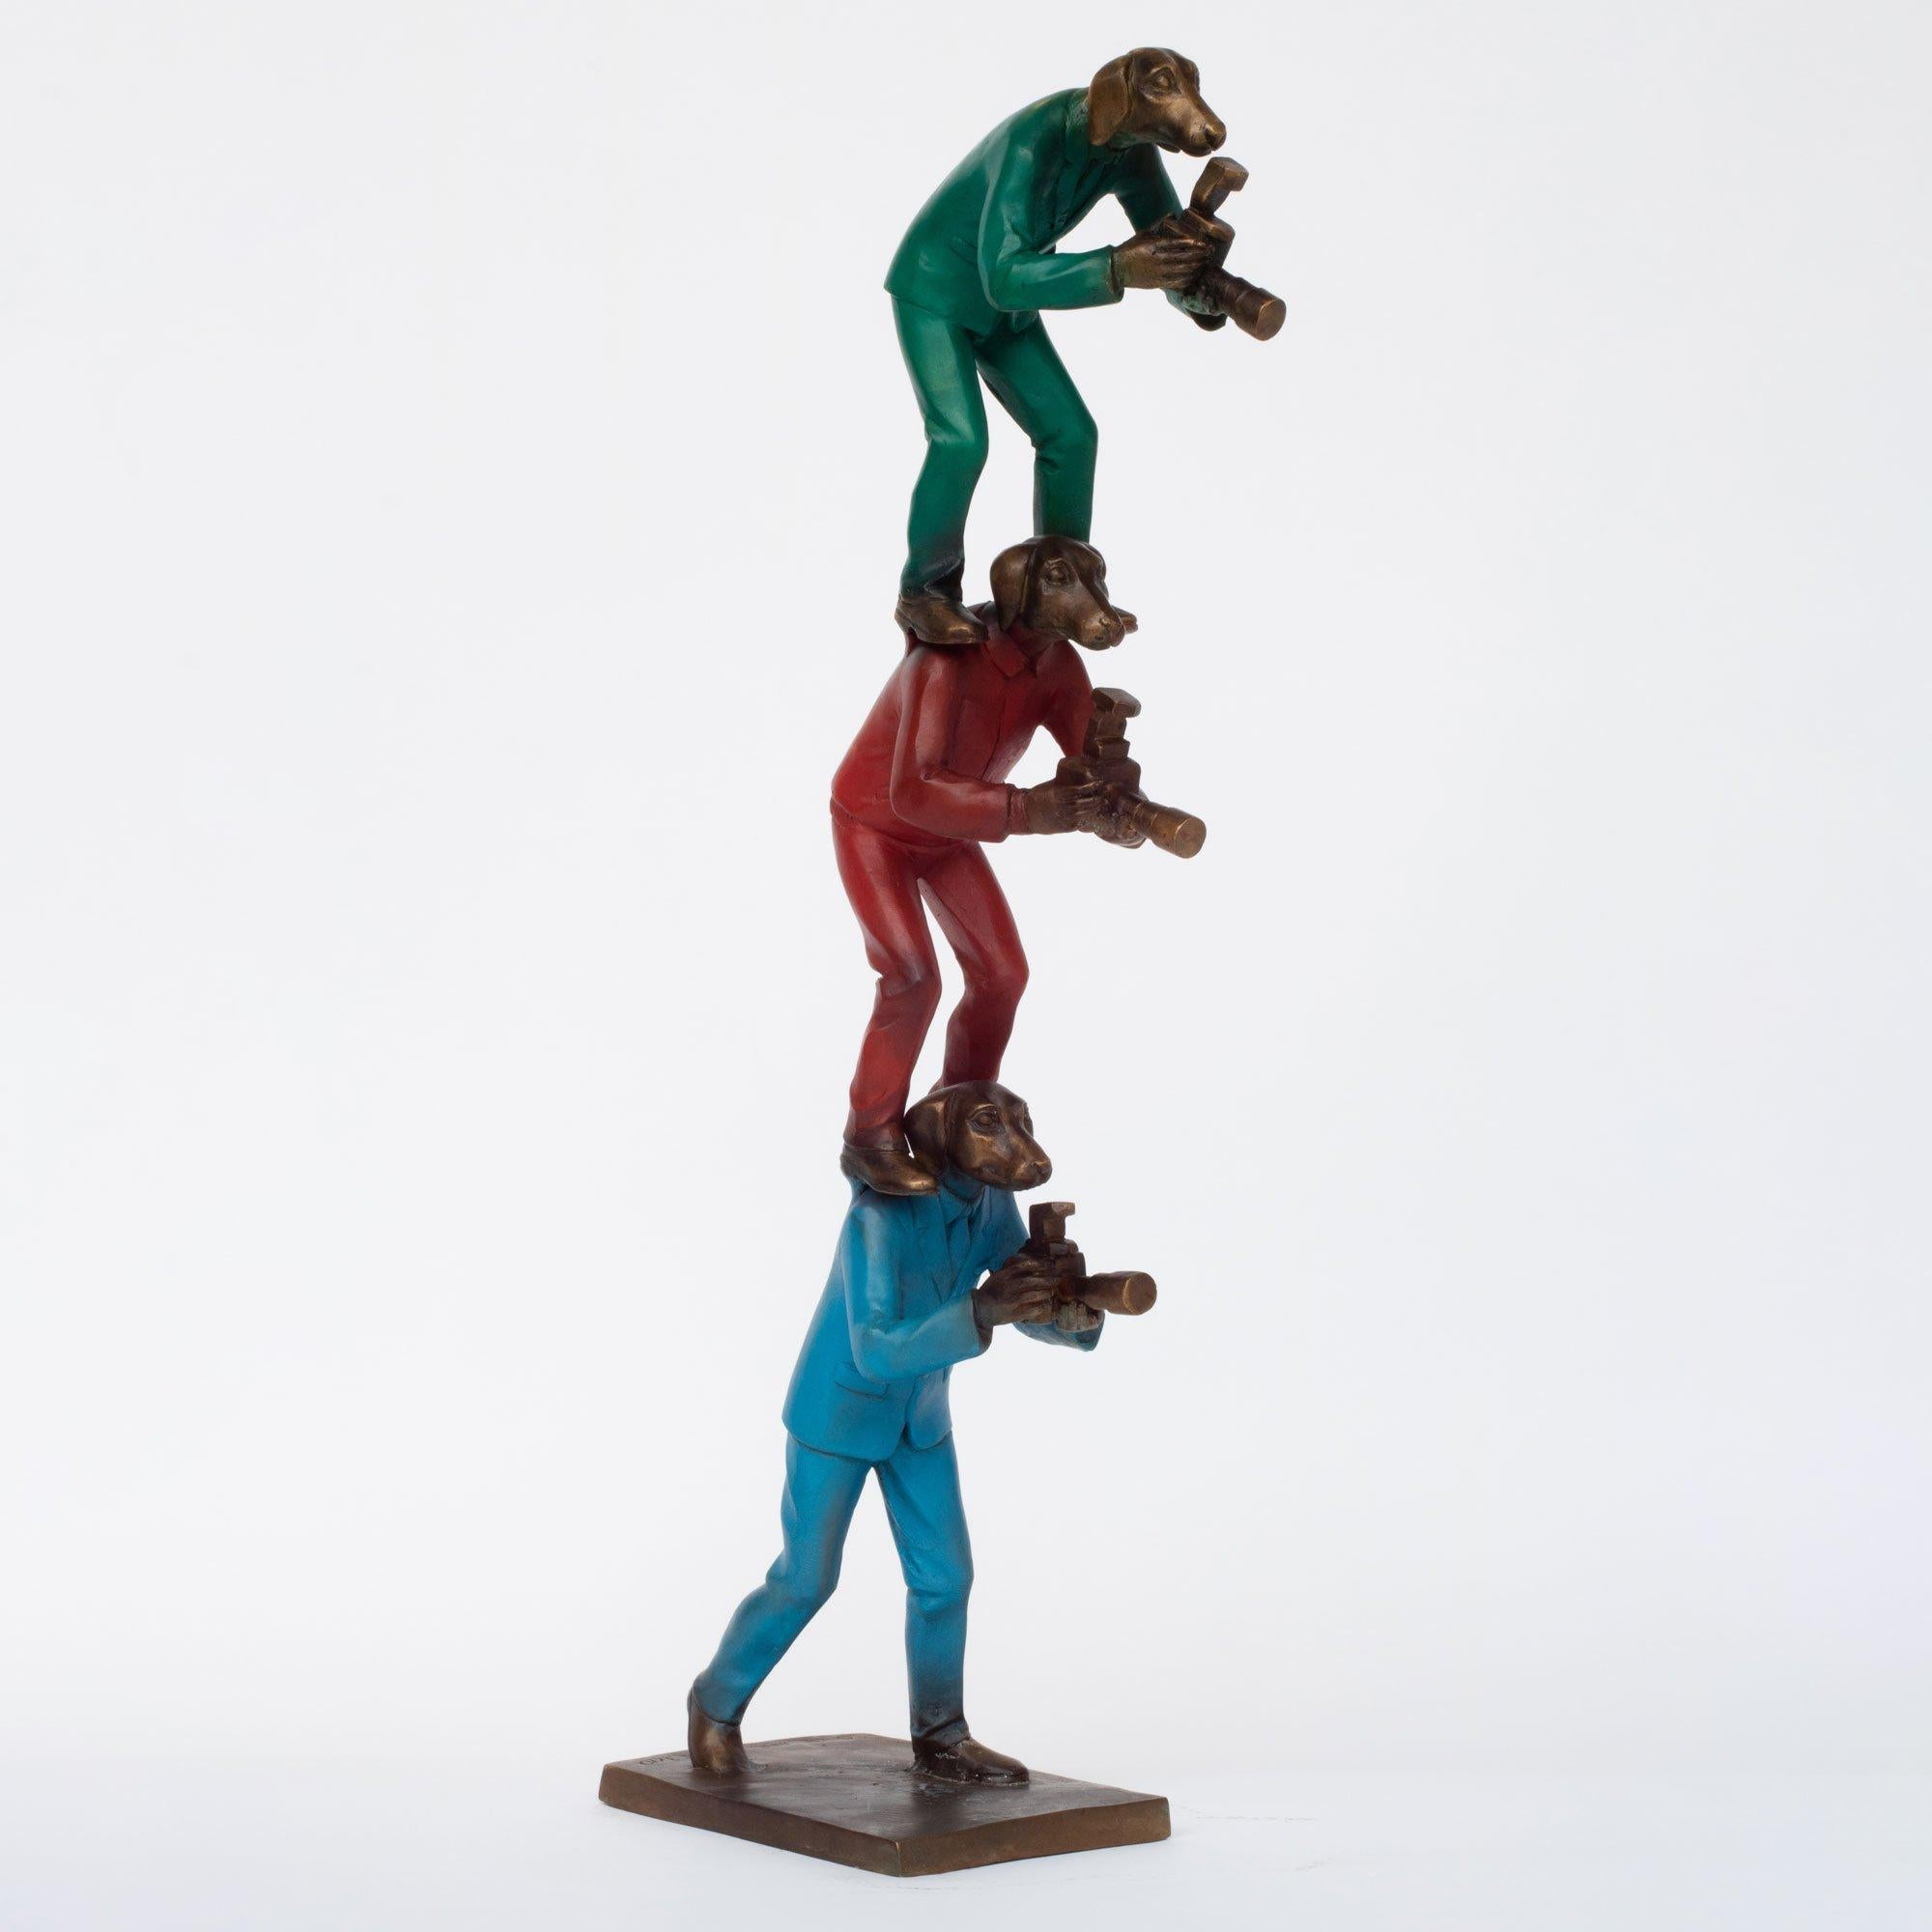 Title: 3 Friends (Miniature)
Authentic bronze sculpture with coloured patina
Limited Edition

World Famous Contemporary Artists: Husband and wife team, Gillie and Marc, are New York and Sydney-based contemporary artists who collaborate to create